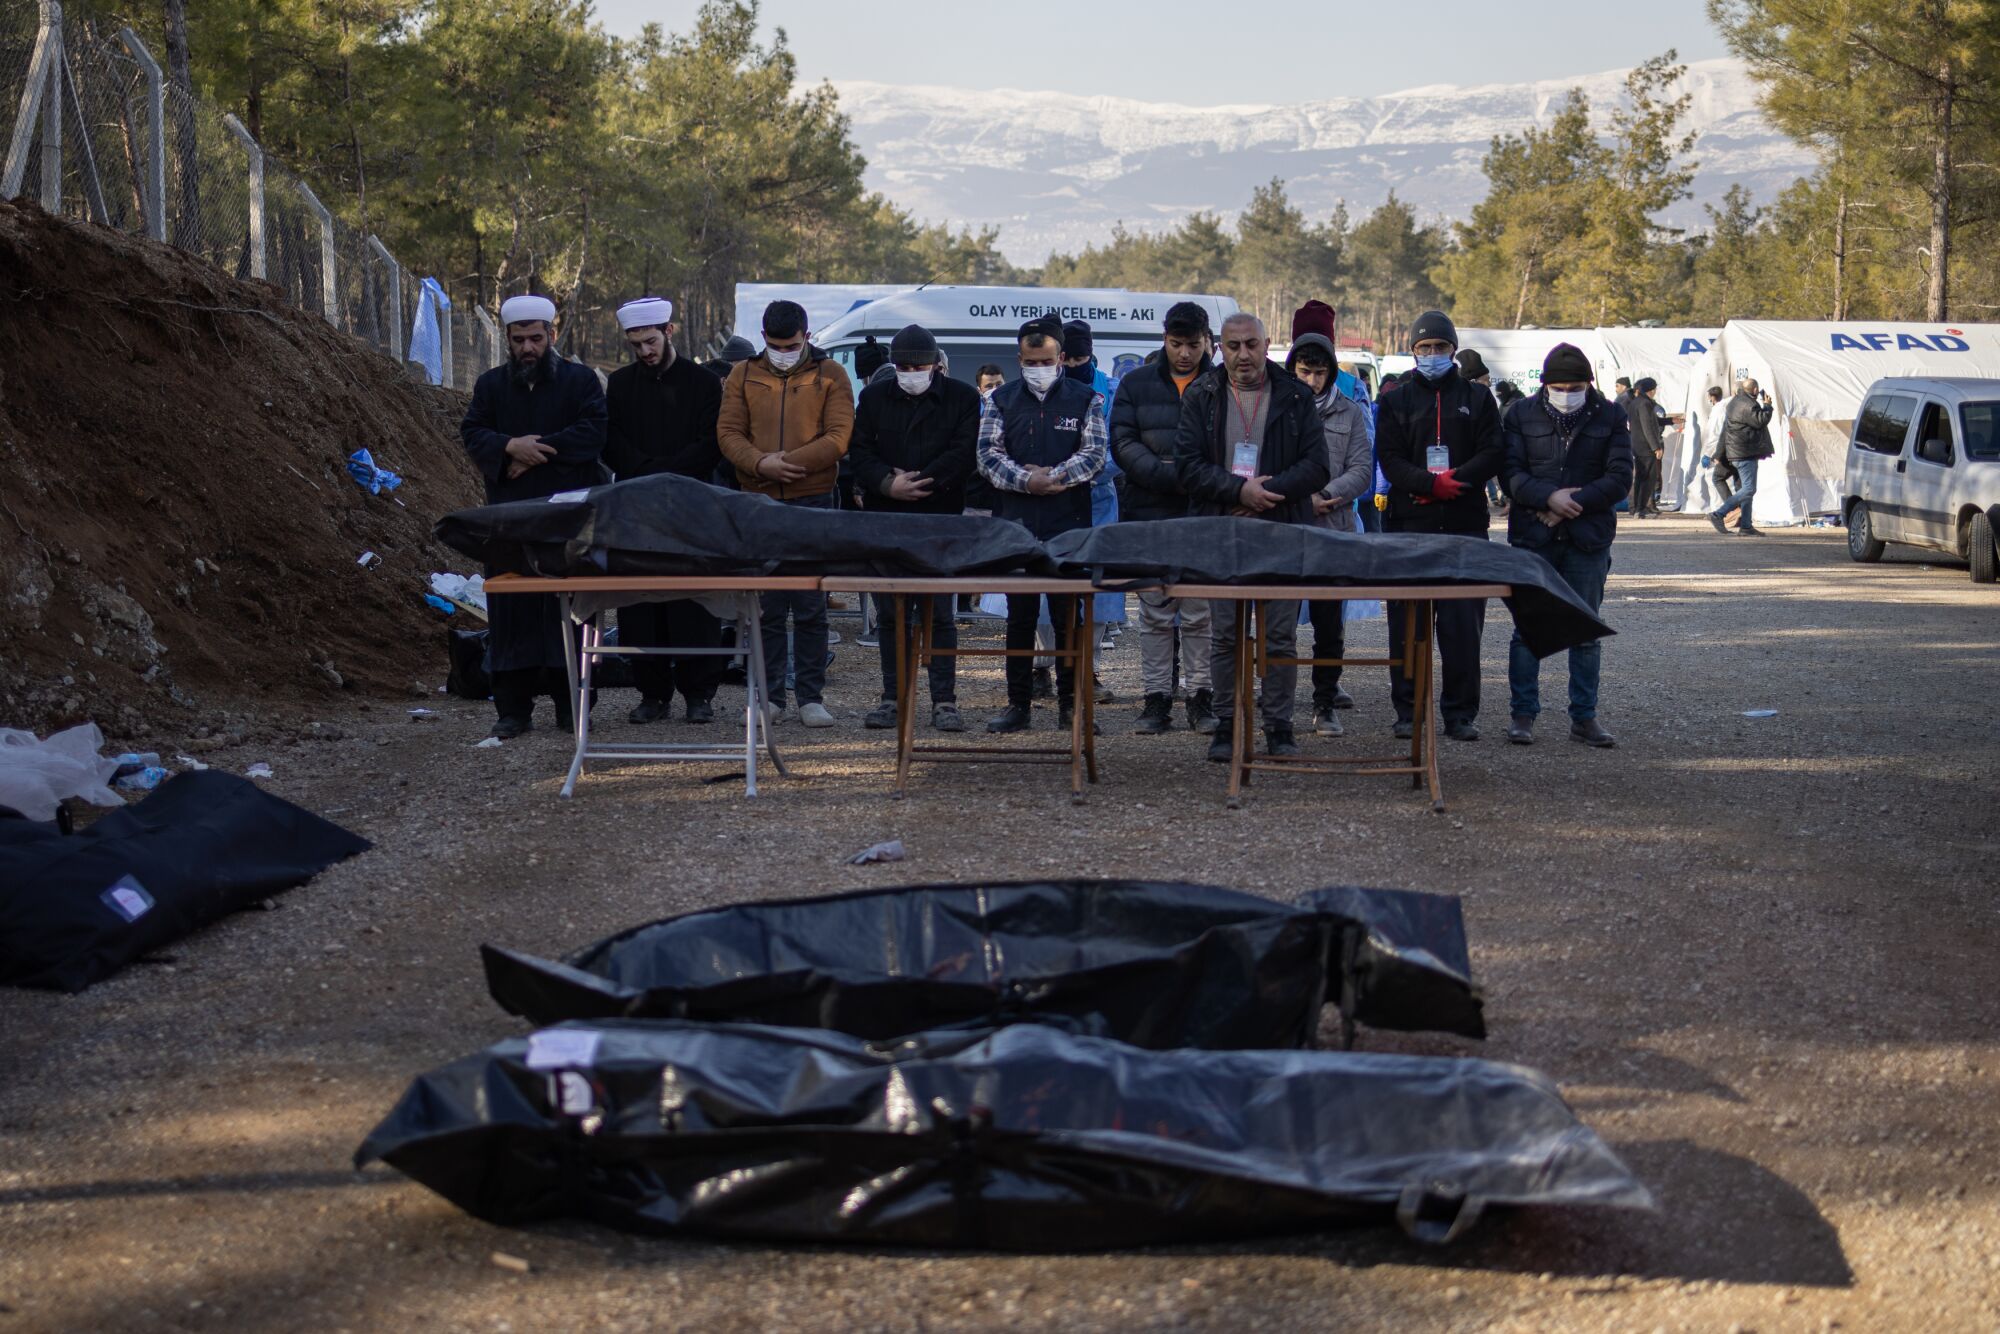 A short row of men stands in prayer over a few black plastic body bags. Snowcapped mountains are on the horizon.